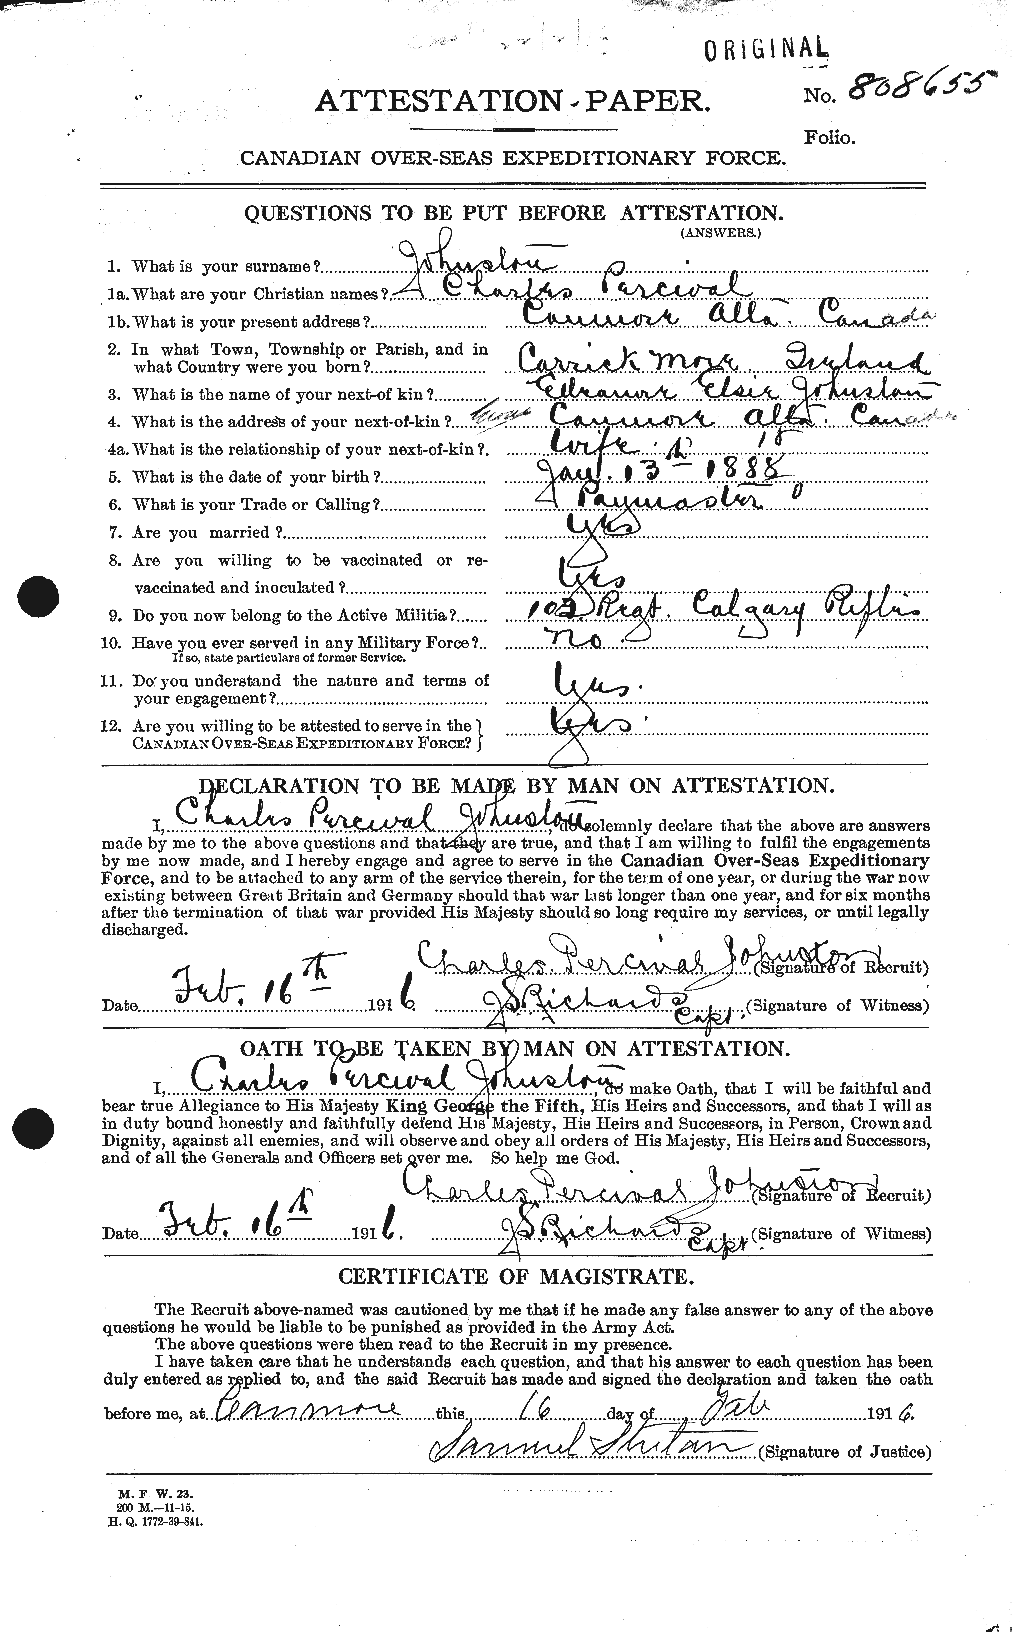 Personnel Records of the First World War - CEF 423116a